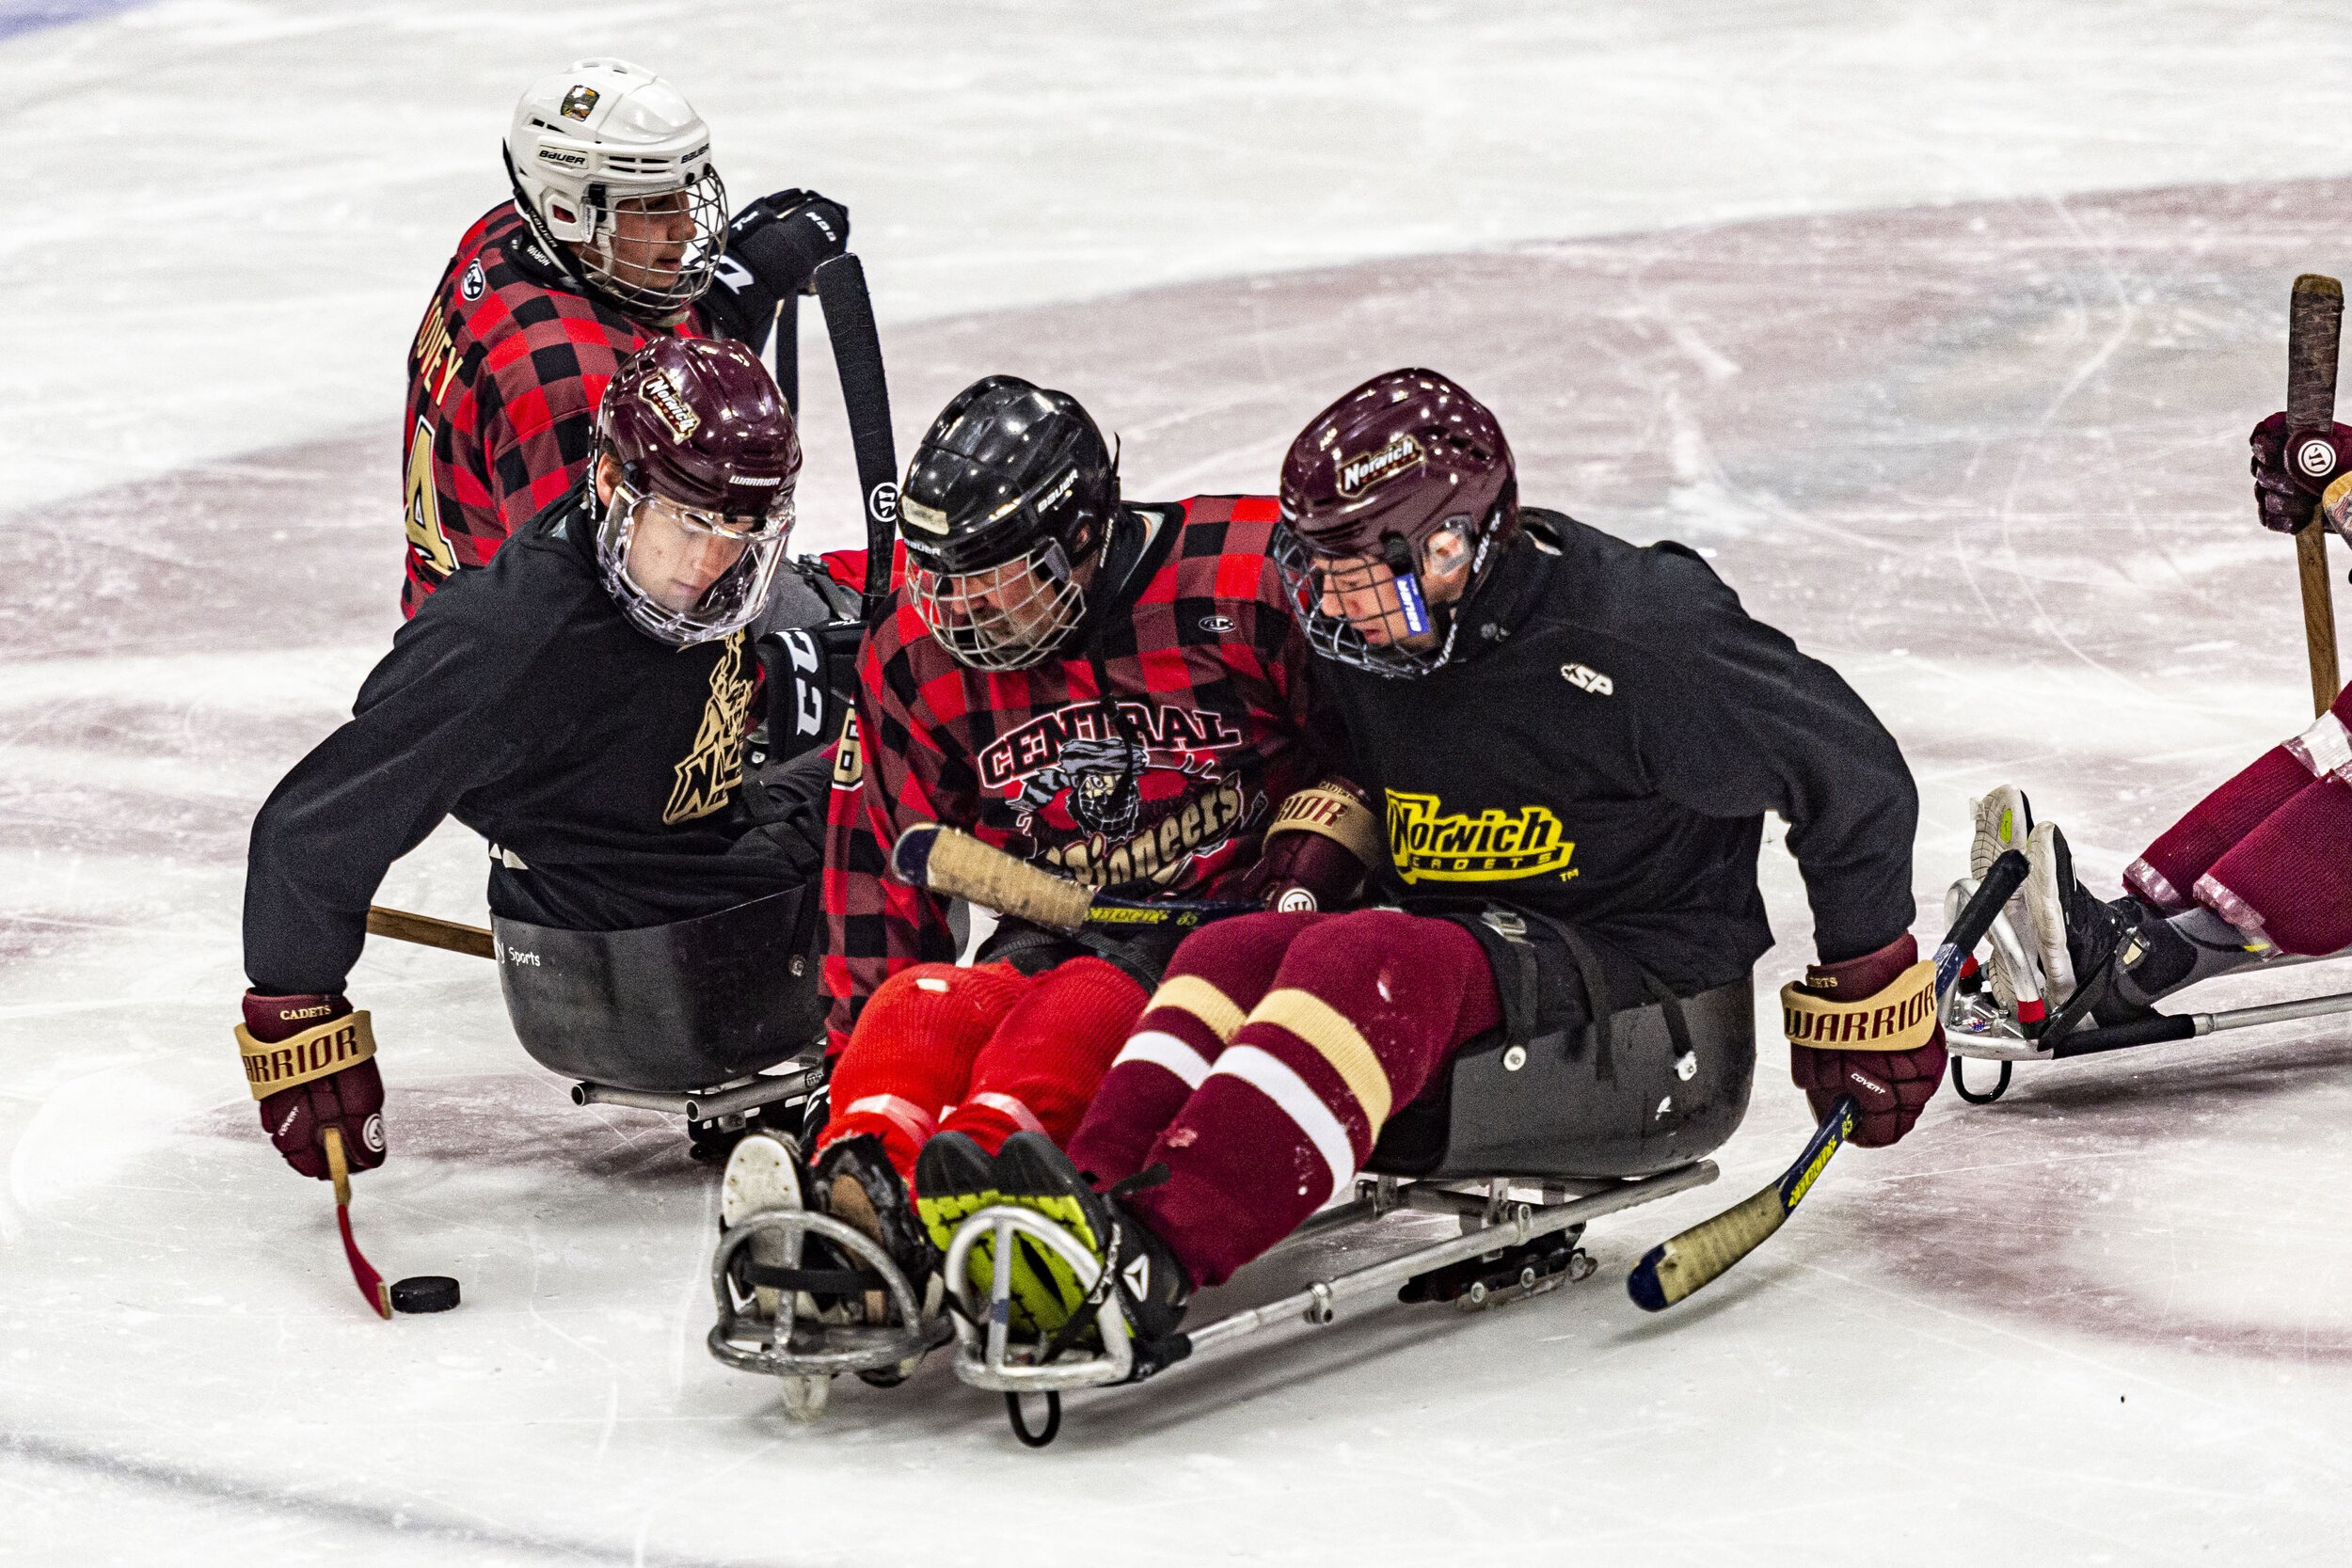  The Central Vermont Pioneers sled hockey team holds a practice with the Norwich University Mens’ Hockey team on Monday, December 9th 2019 in Northfield, VT.  